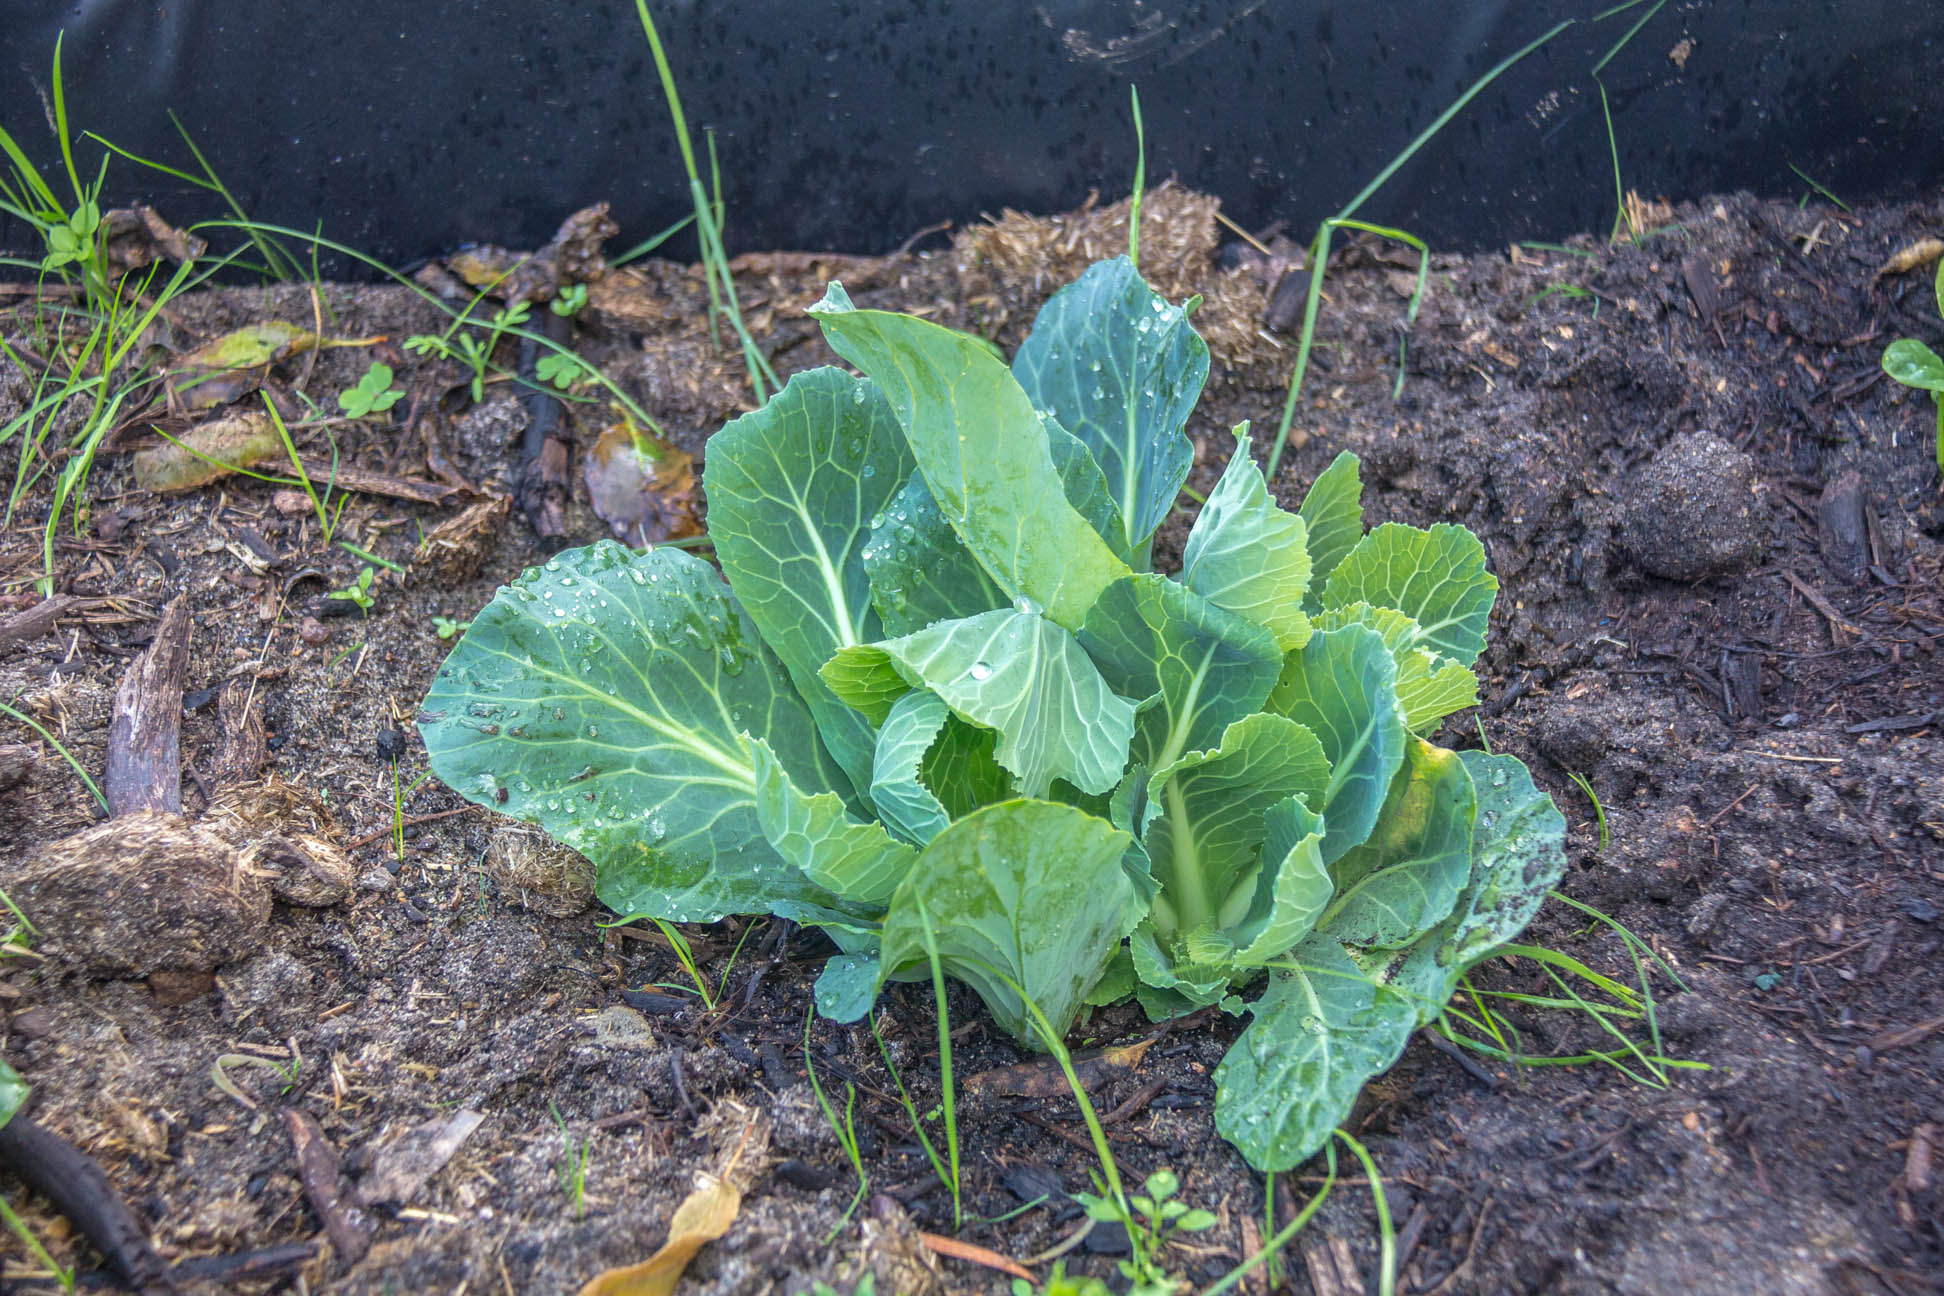 12/06/15 Day 59: a different angle of the cabbage plant^^